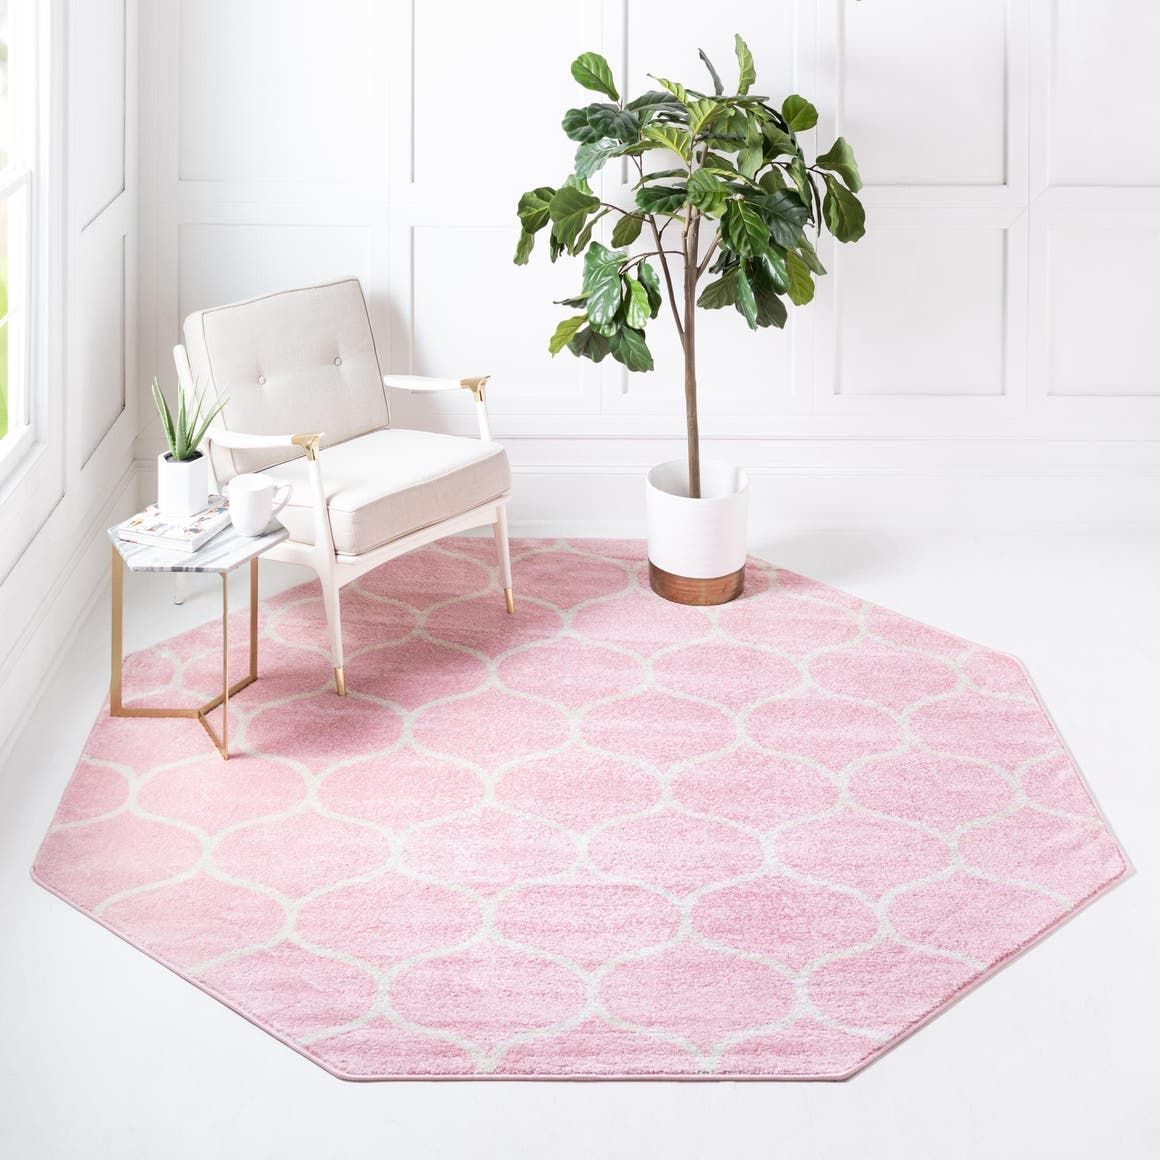 Light Pink 5' X 5' Lattice Frieze Octagon Rug | Octagon Rugs, Modern Area  Rugs, Pink Area Rug Within Pink Lattice Frieze Rugs (Photo 4 of 15)